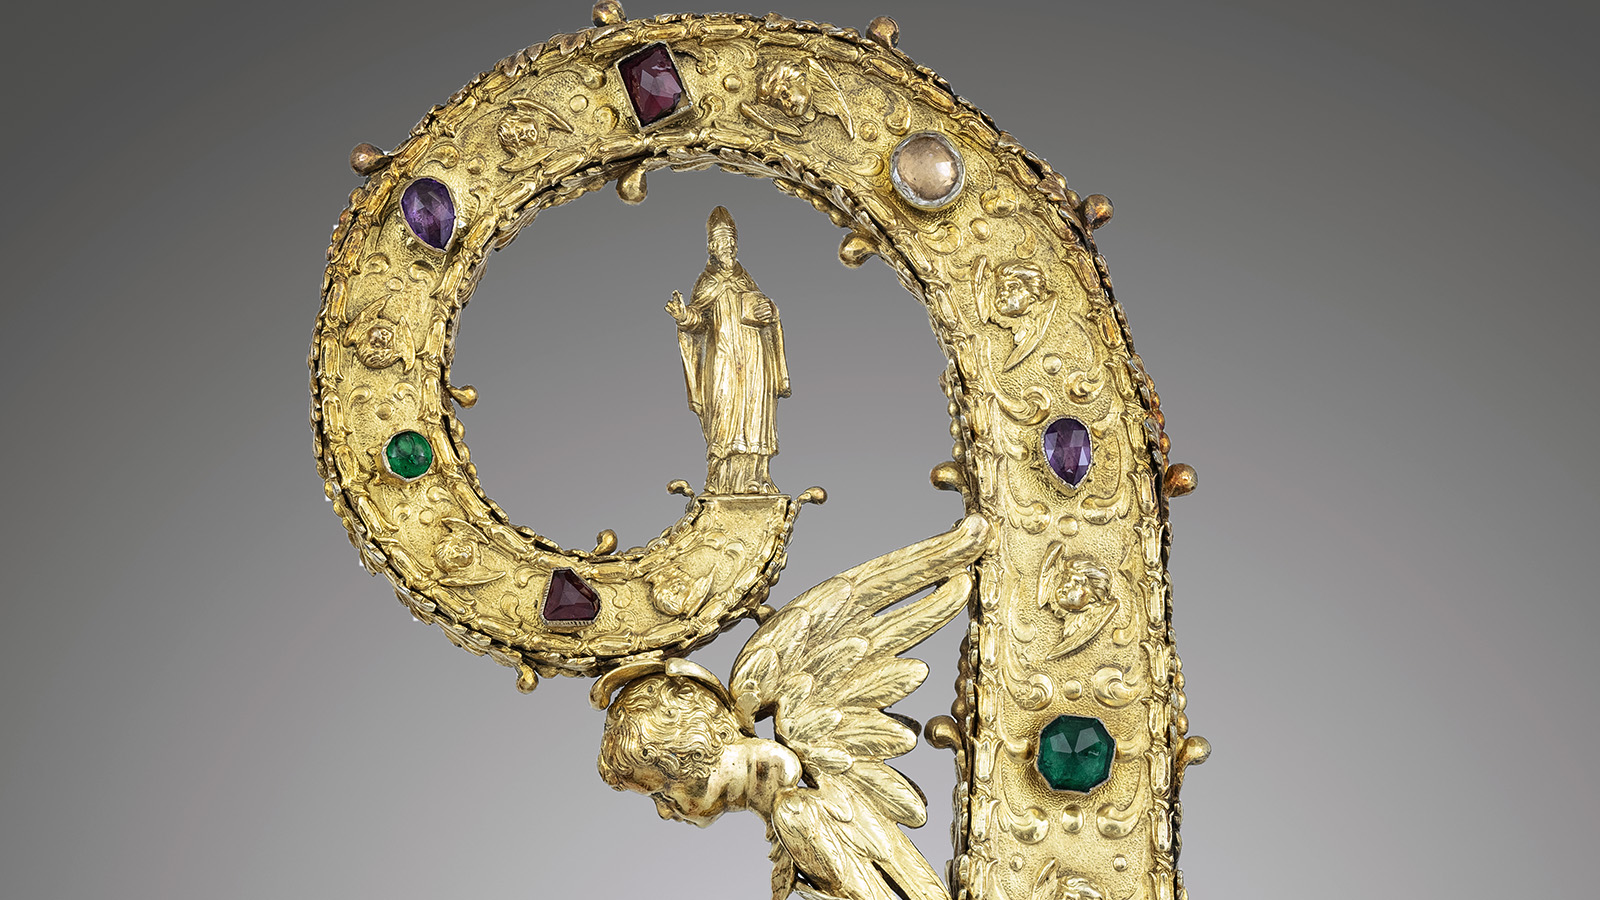 Crozier [detail]. Nicolas Dolin (active in 1648-1684). Paris, France, 1654-1655. Silver gilt and gemstones. Custody of the Holy Land, Jerusalem